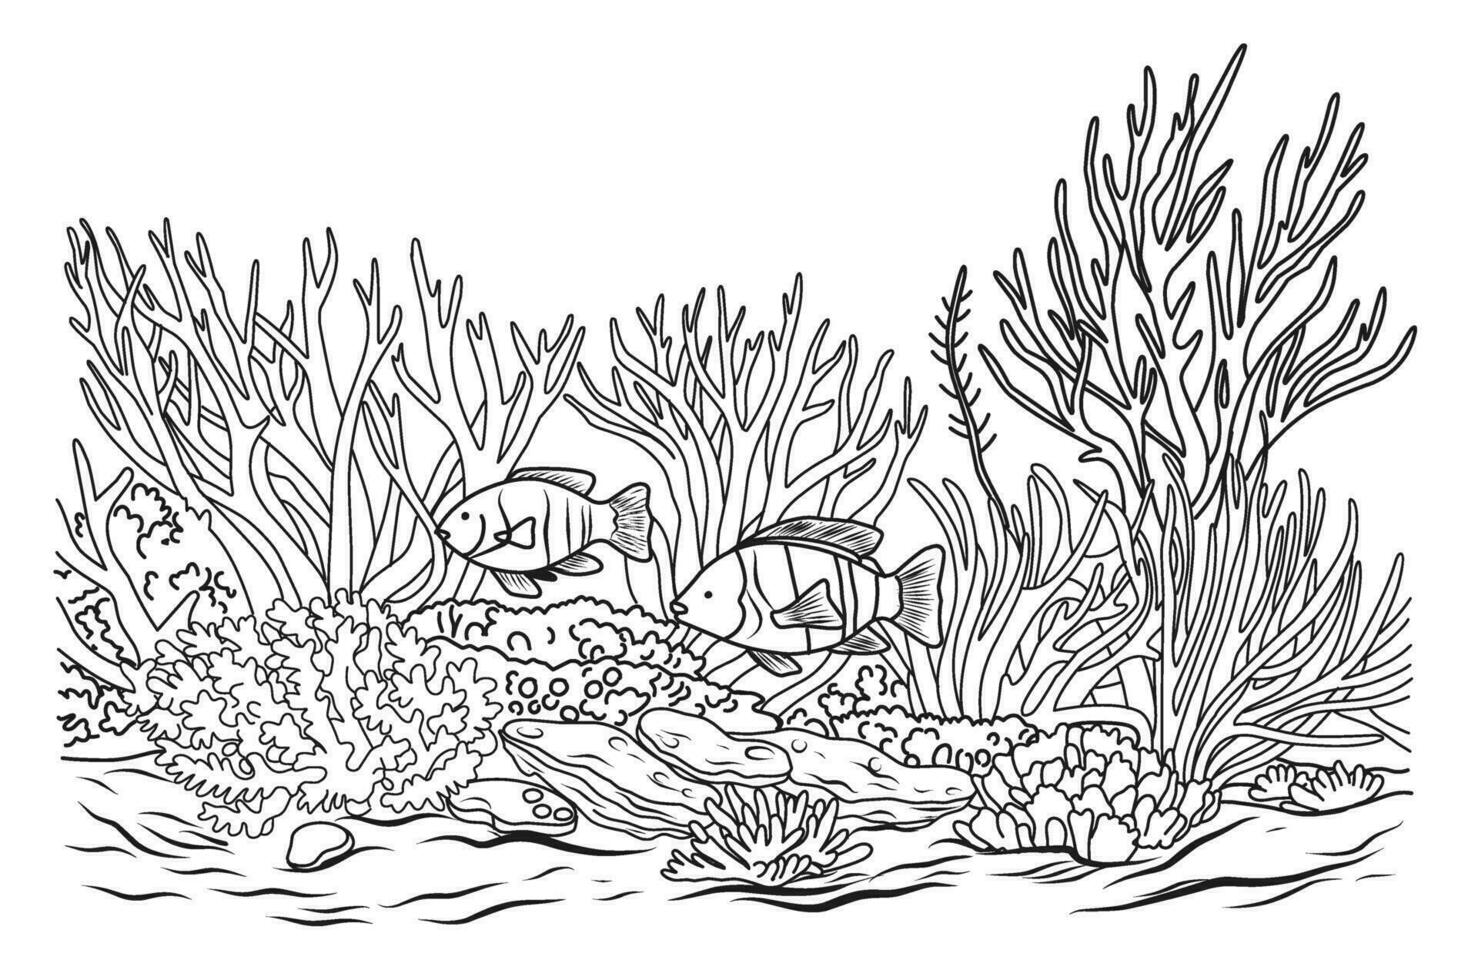 Ocean bottom coloring page with fish and algae. Sea life coloring book vector